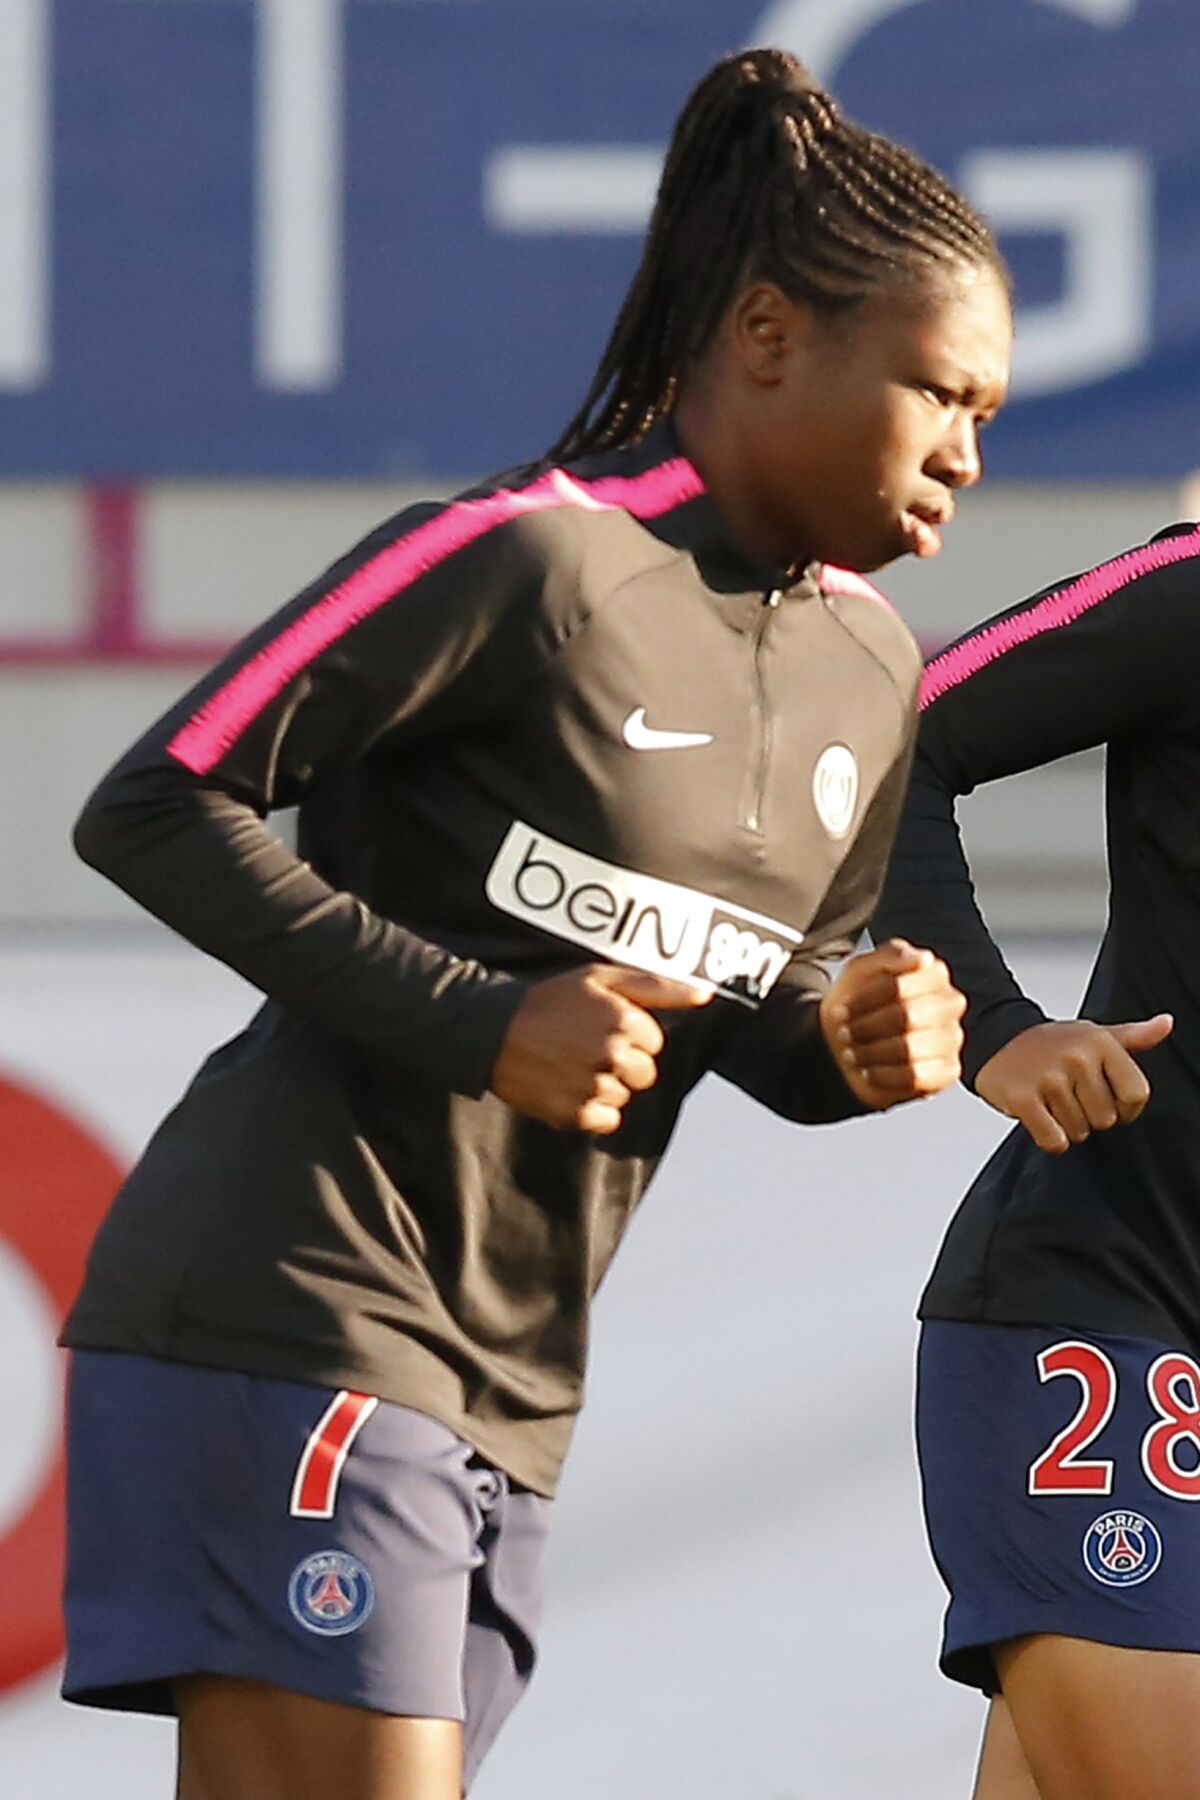 FILE - PSG's Aminata Diallo warms up prior to their Women's Champions League soccer match between Paris-Saint-Germain and Sankt Polten at Jean Bouin stadium in Paris, France, on Sept. 27, 2018. Paris Saint-Germain says that midfielder Aminata Diallo has been taken into police custody following an attack on other players from the women’s team. PSG said in a statement that the 26-year-old Diallo was arrested on Wednesday morning by Versailles police following the attack that took place last Thursday evening. (AP Photo/Michel Euler)